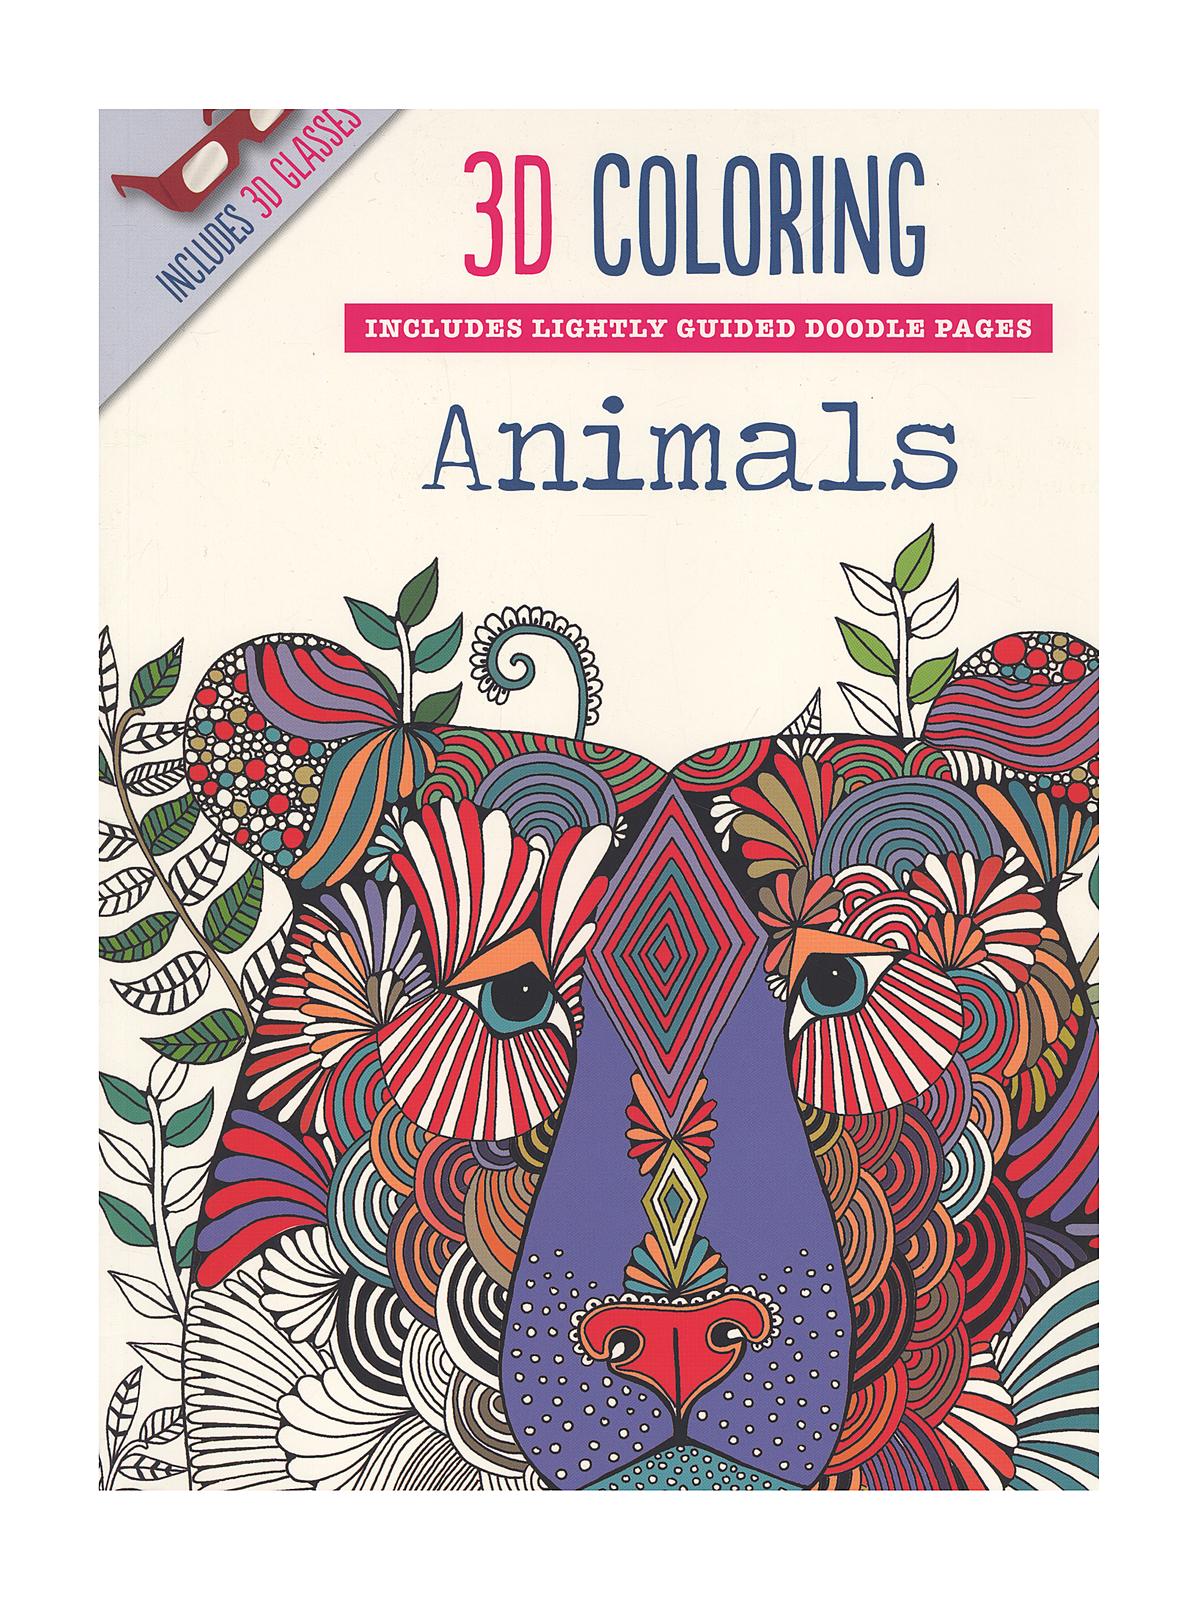 3d Coloring Animals